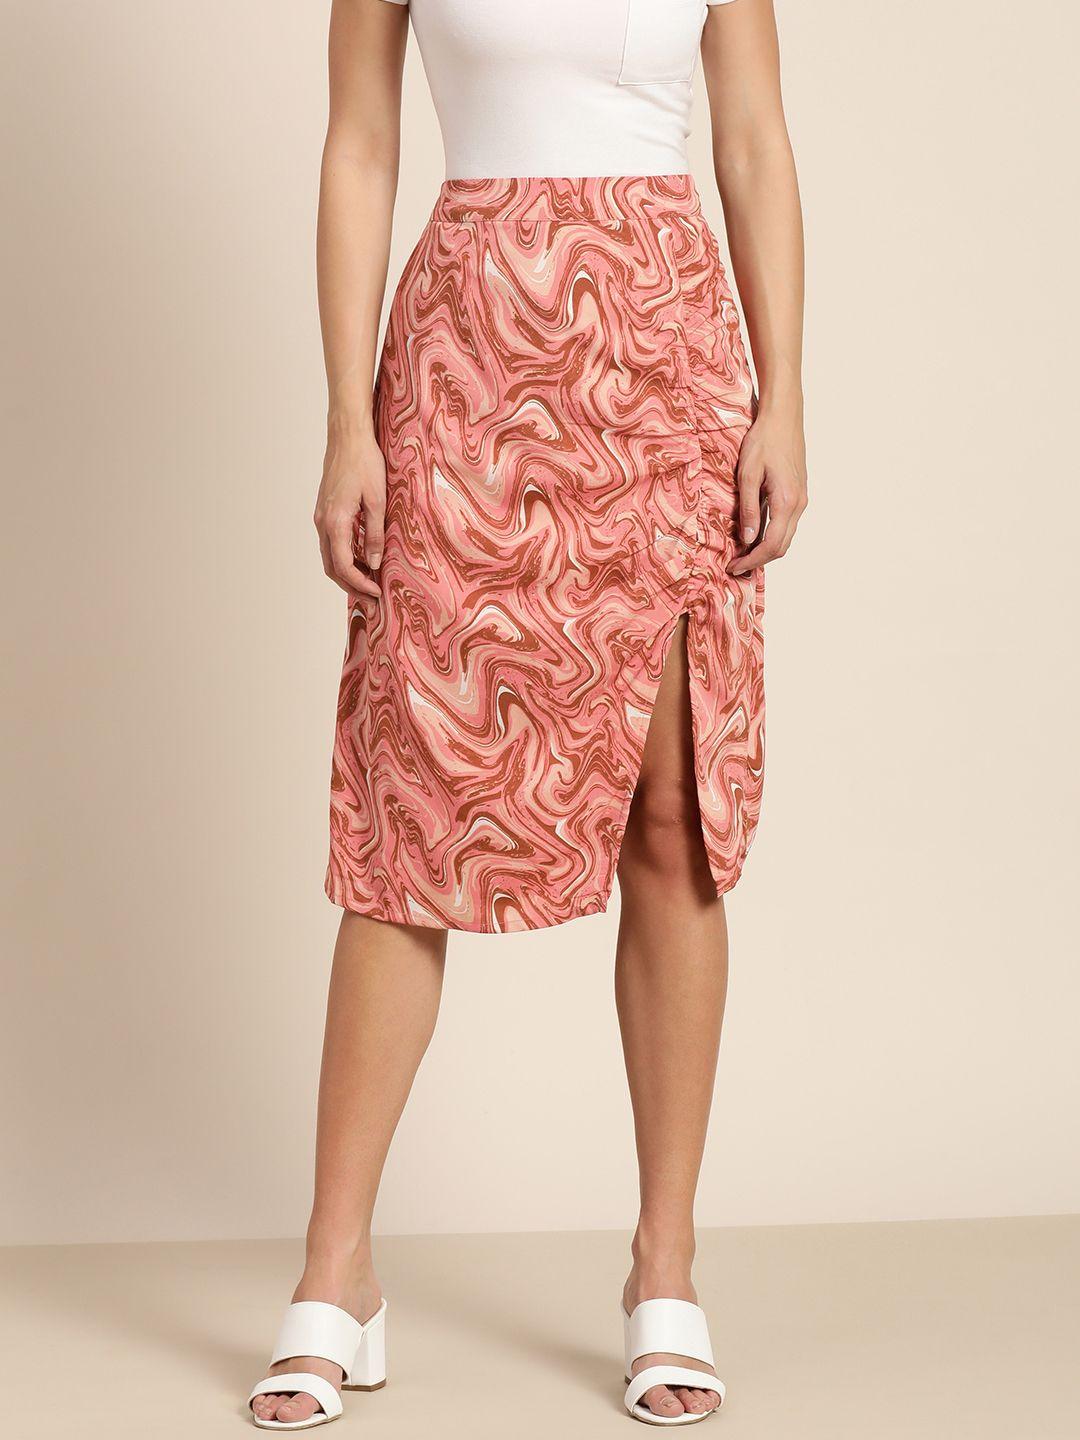 marie claire women peach-coloured abstract print ruched detail high-slit a-line skirt